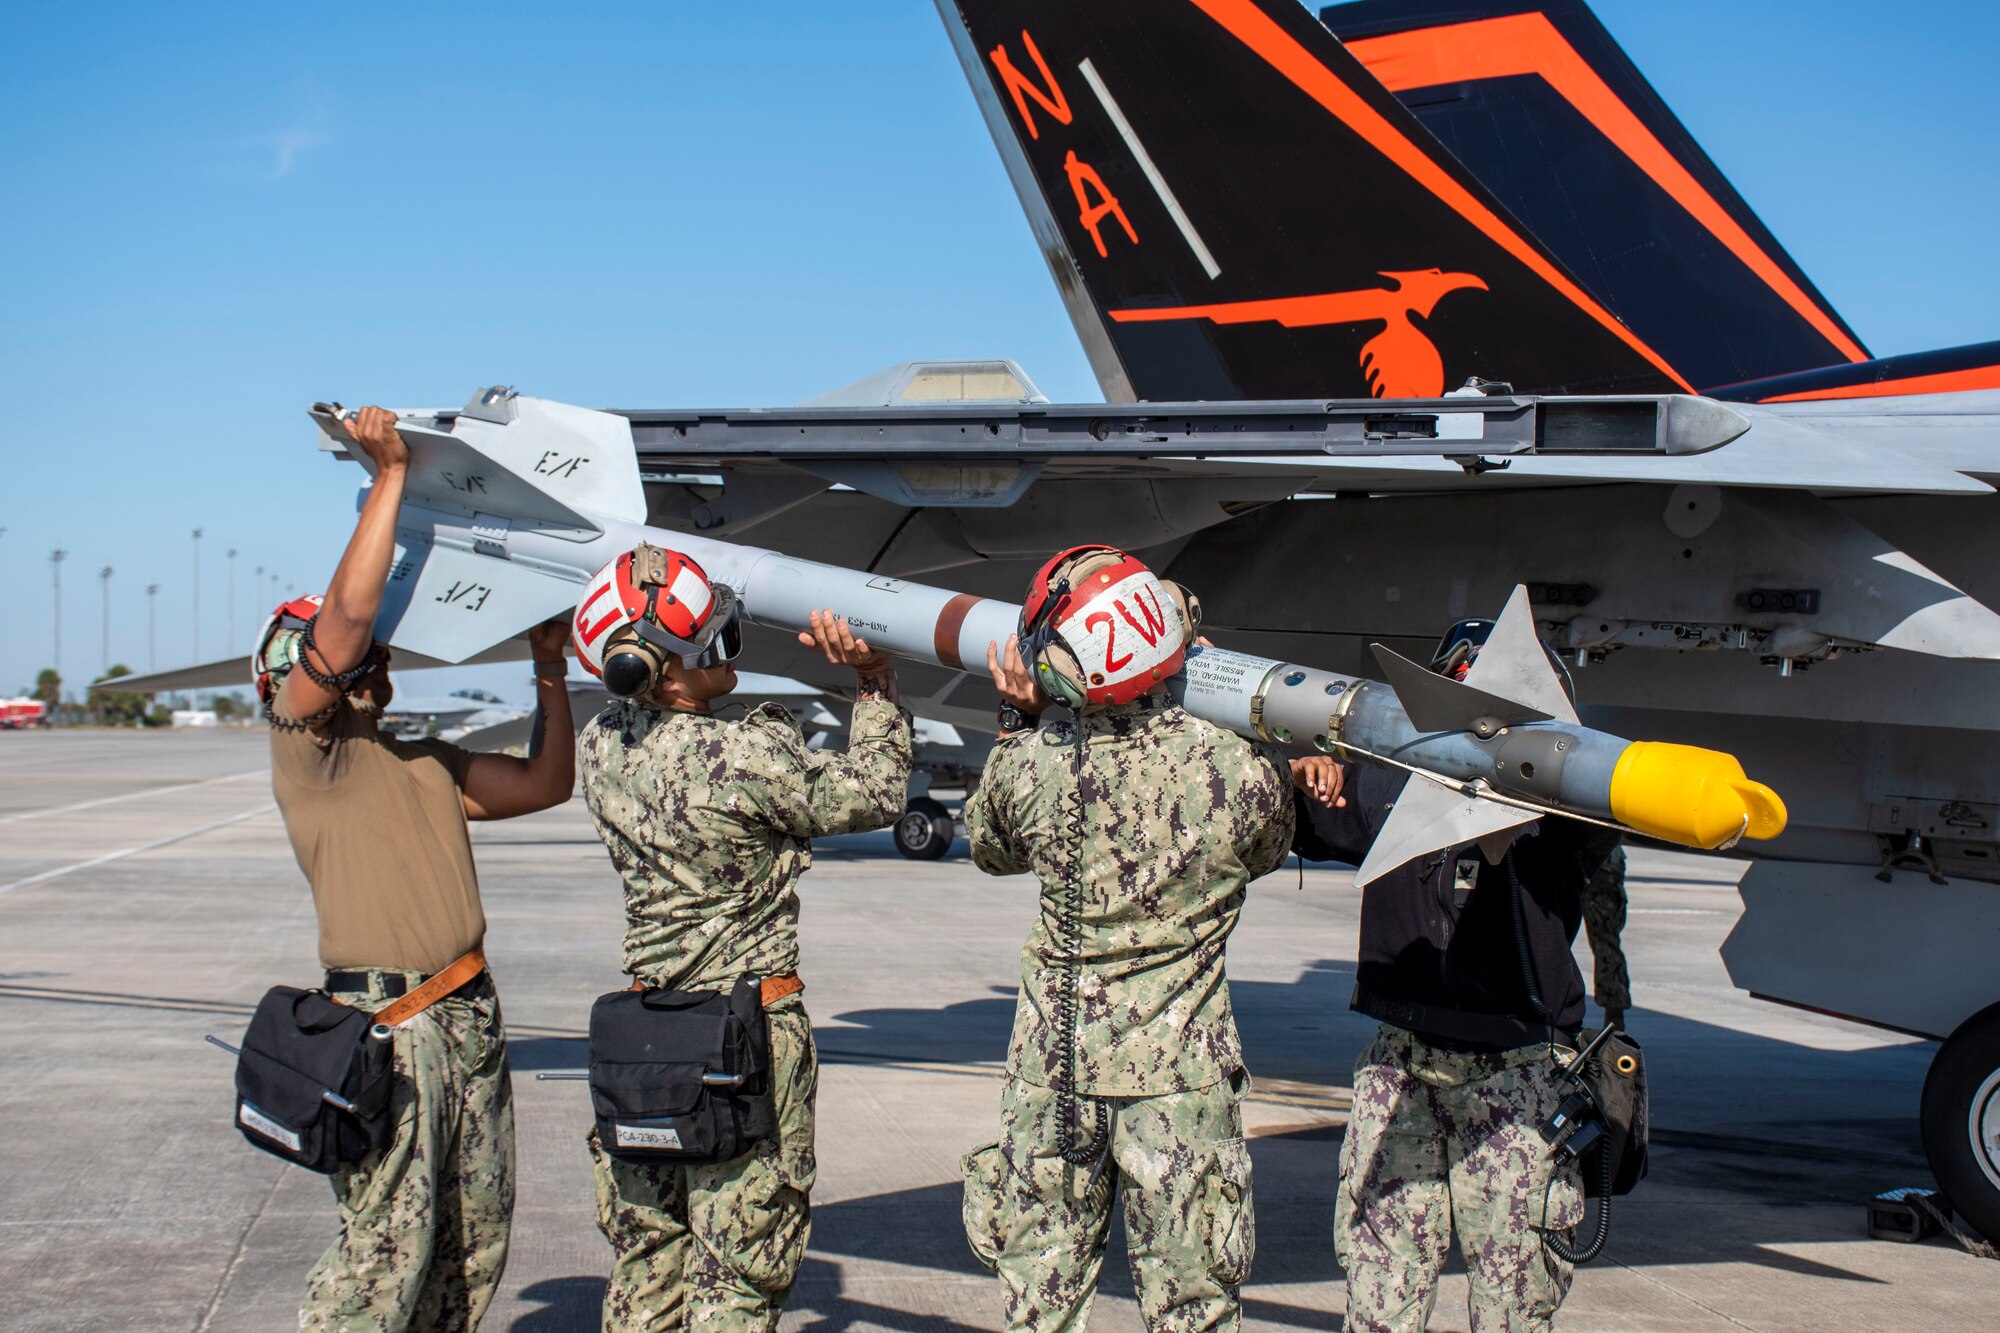 Four Ordnancemen attached to Strike Fighter Squadron 94 load an AIM-9 Sidewinder onto the wingtip launcher of an F/A-18F Super Hornet before a live-fire mission at Tyndall AFB, Fla., Nov. 10, 2021. WSEP tests and validates the performance of crews, pilots, and their technology to enhance readiness for real-world operations. (U.S. Air Force photo by 1st Lt Lindsey Heflin)